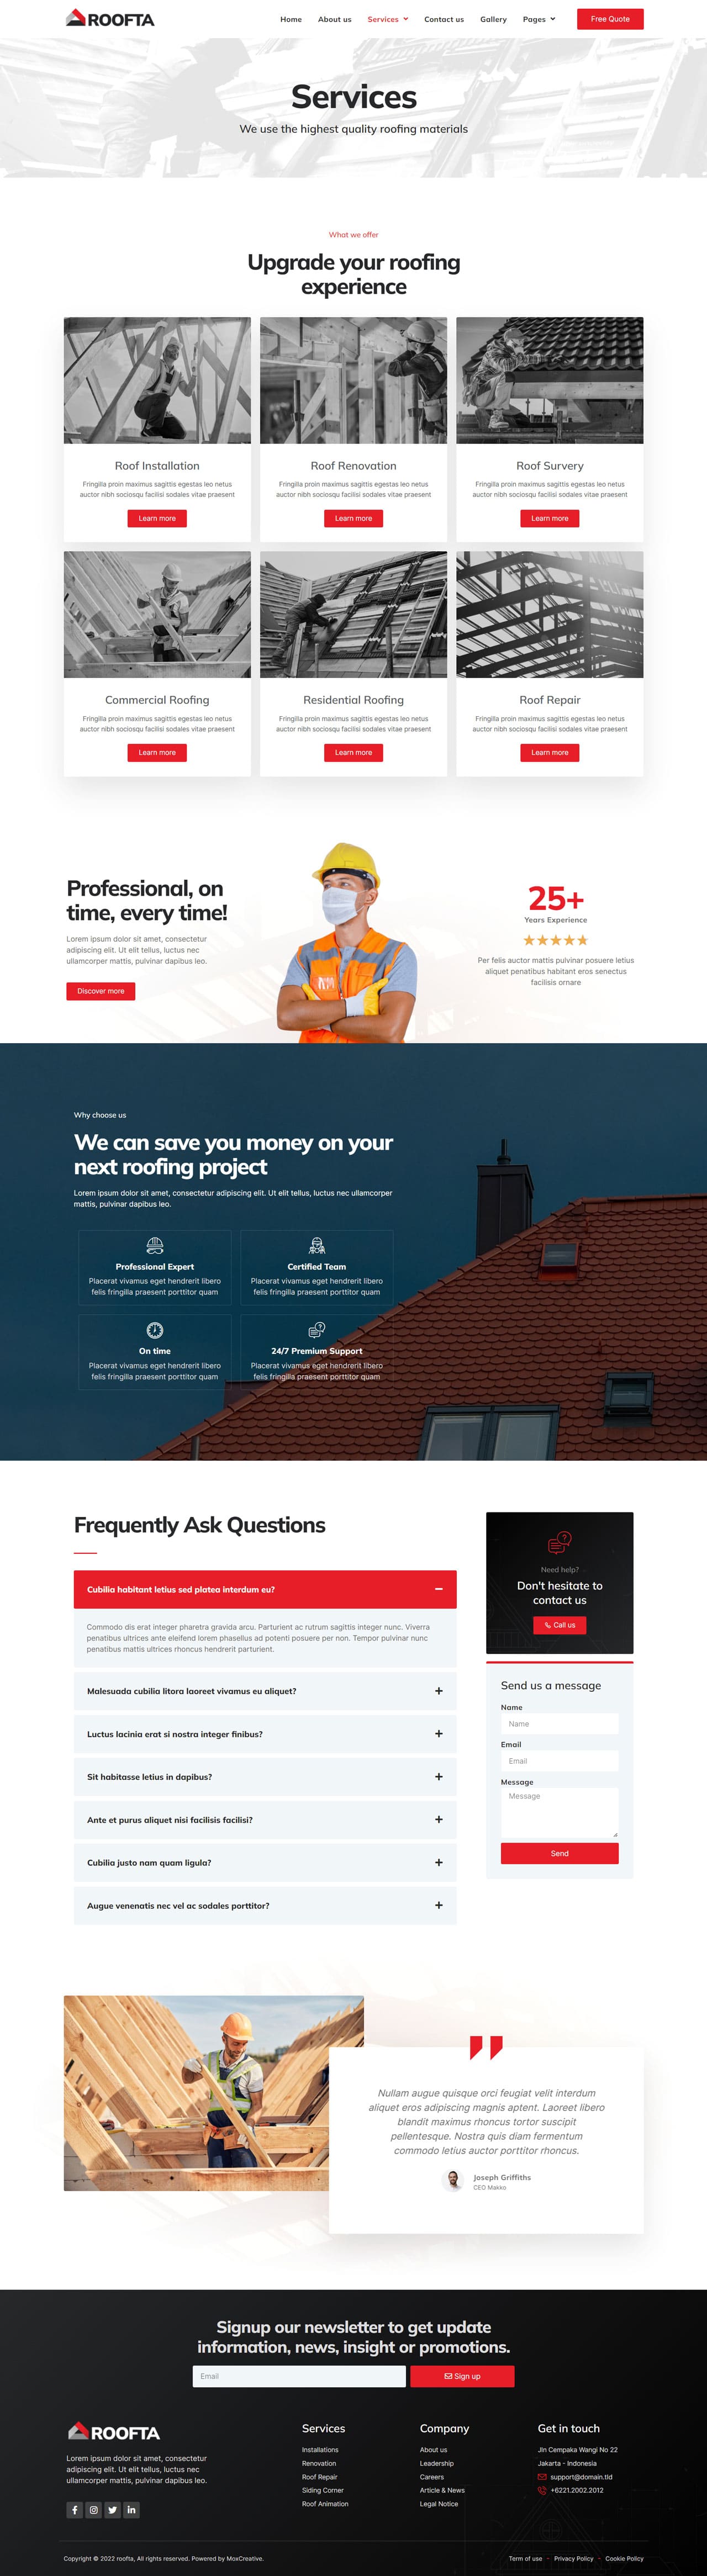 An article “We can save you money on your next roofing project”.